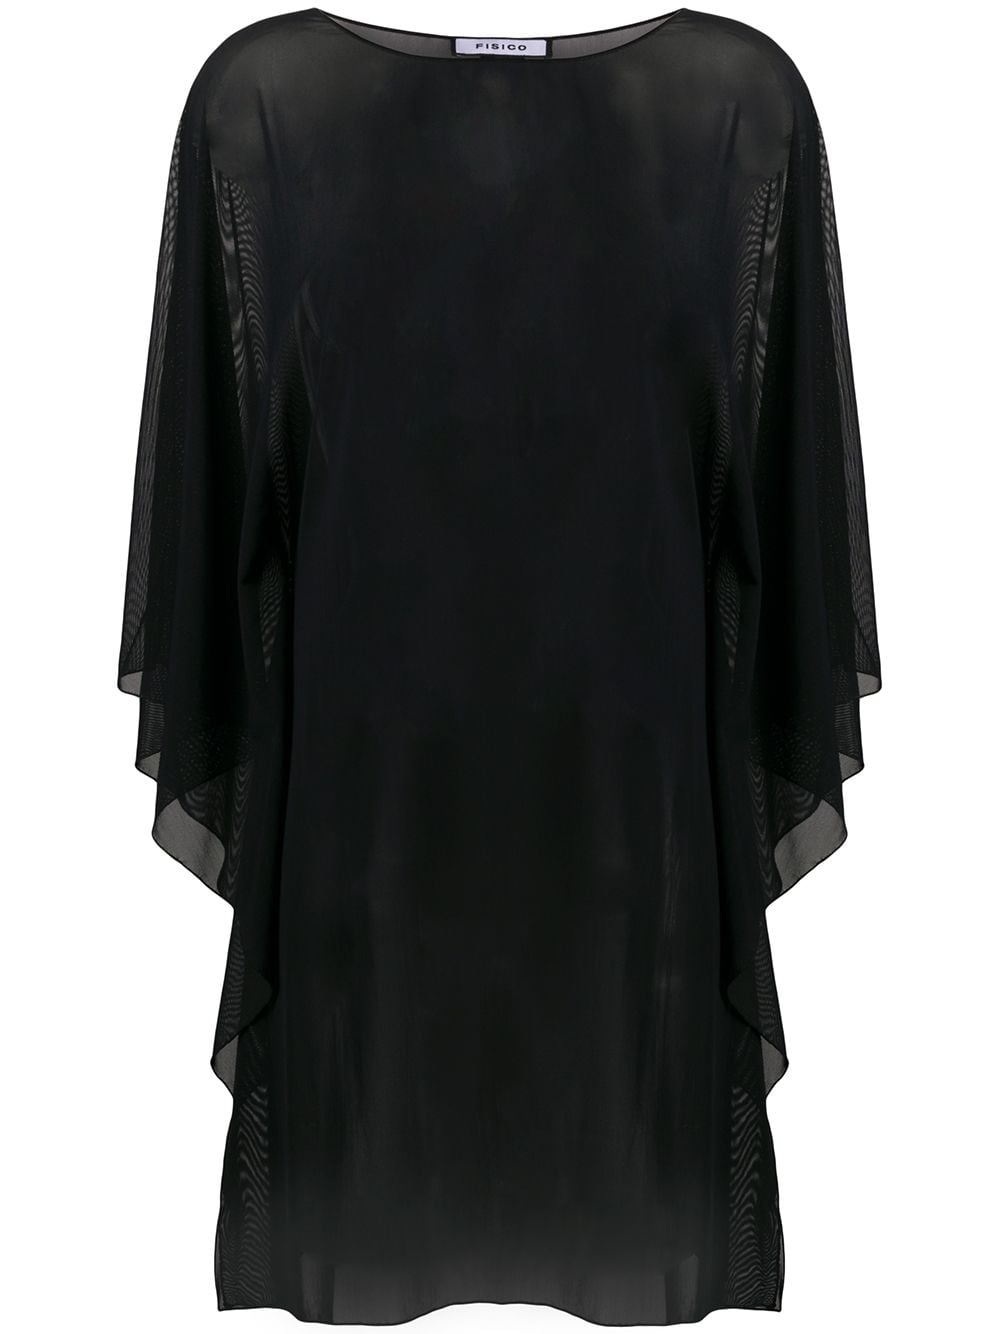 Fisico + Sheer floaty style tunic top